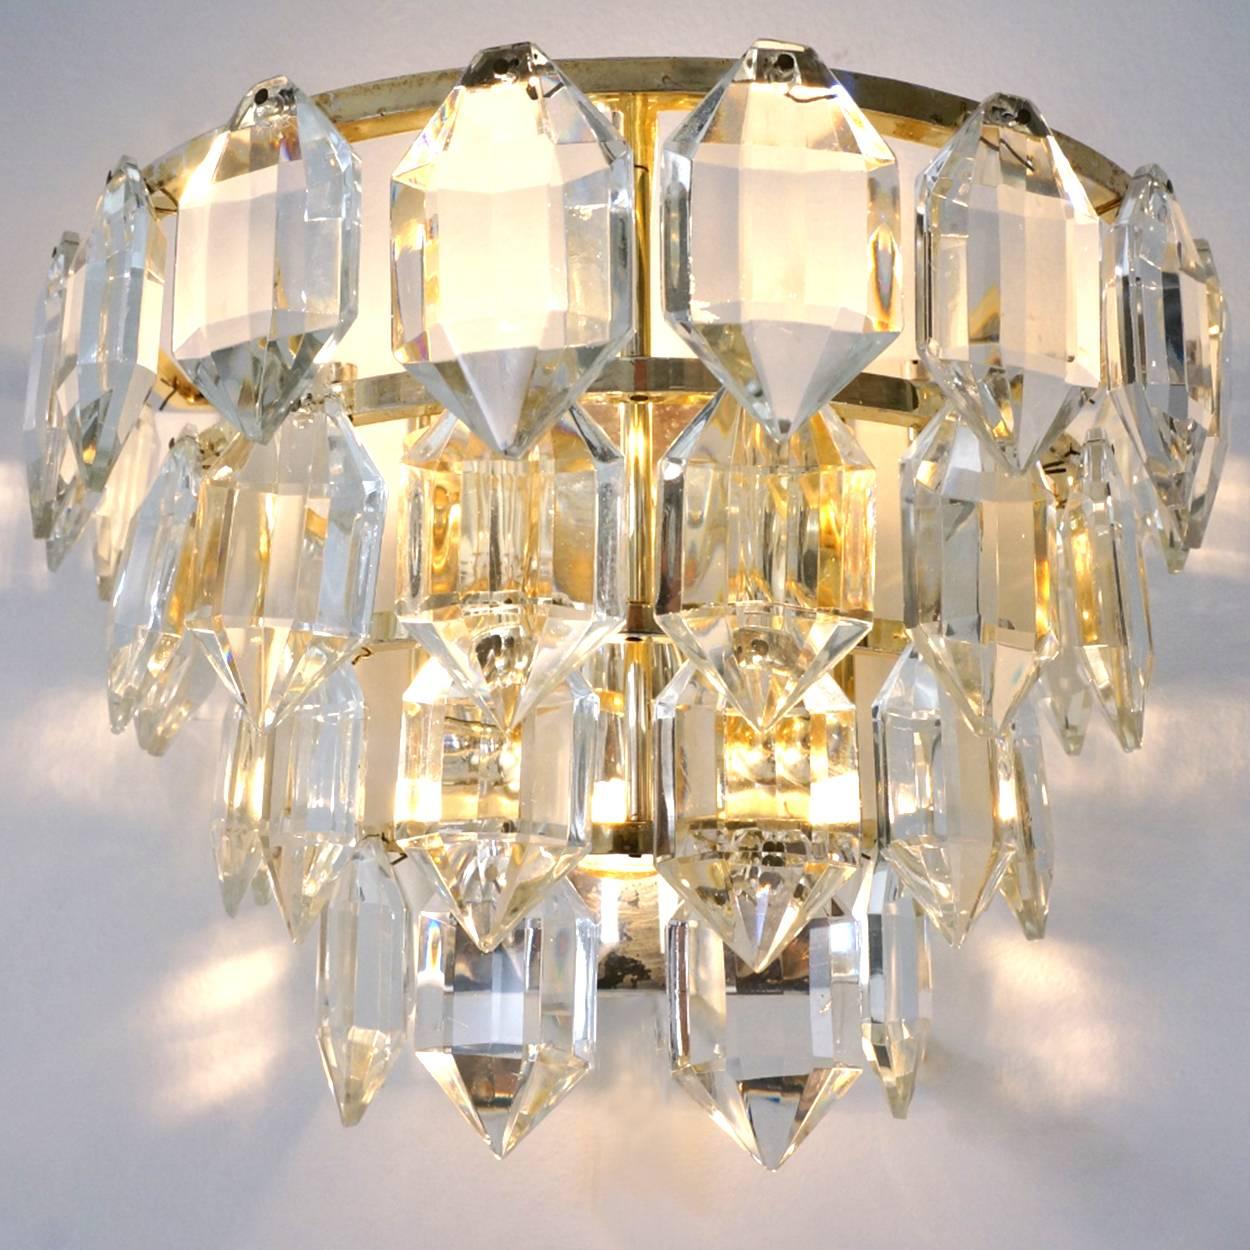 Set of Four Bakalowits Light Fixtures, Brass and Crystal Glass, Austria, 1960s For Sale 4